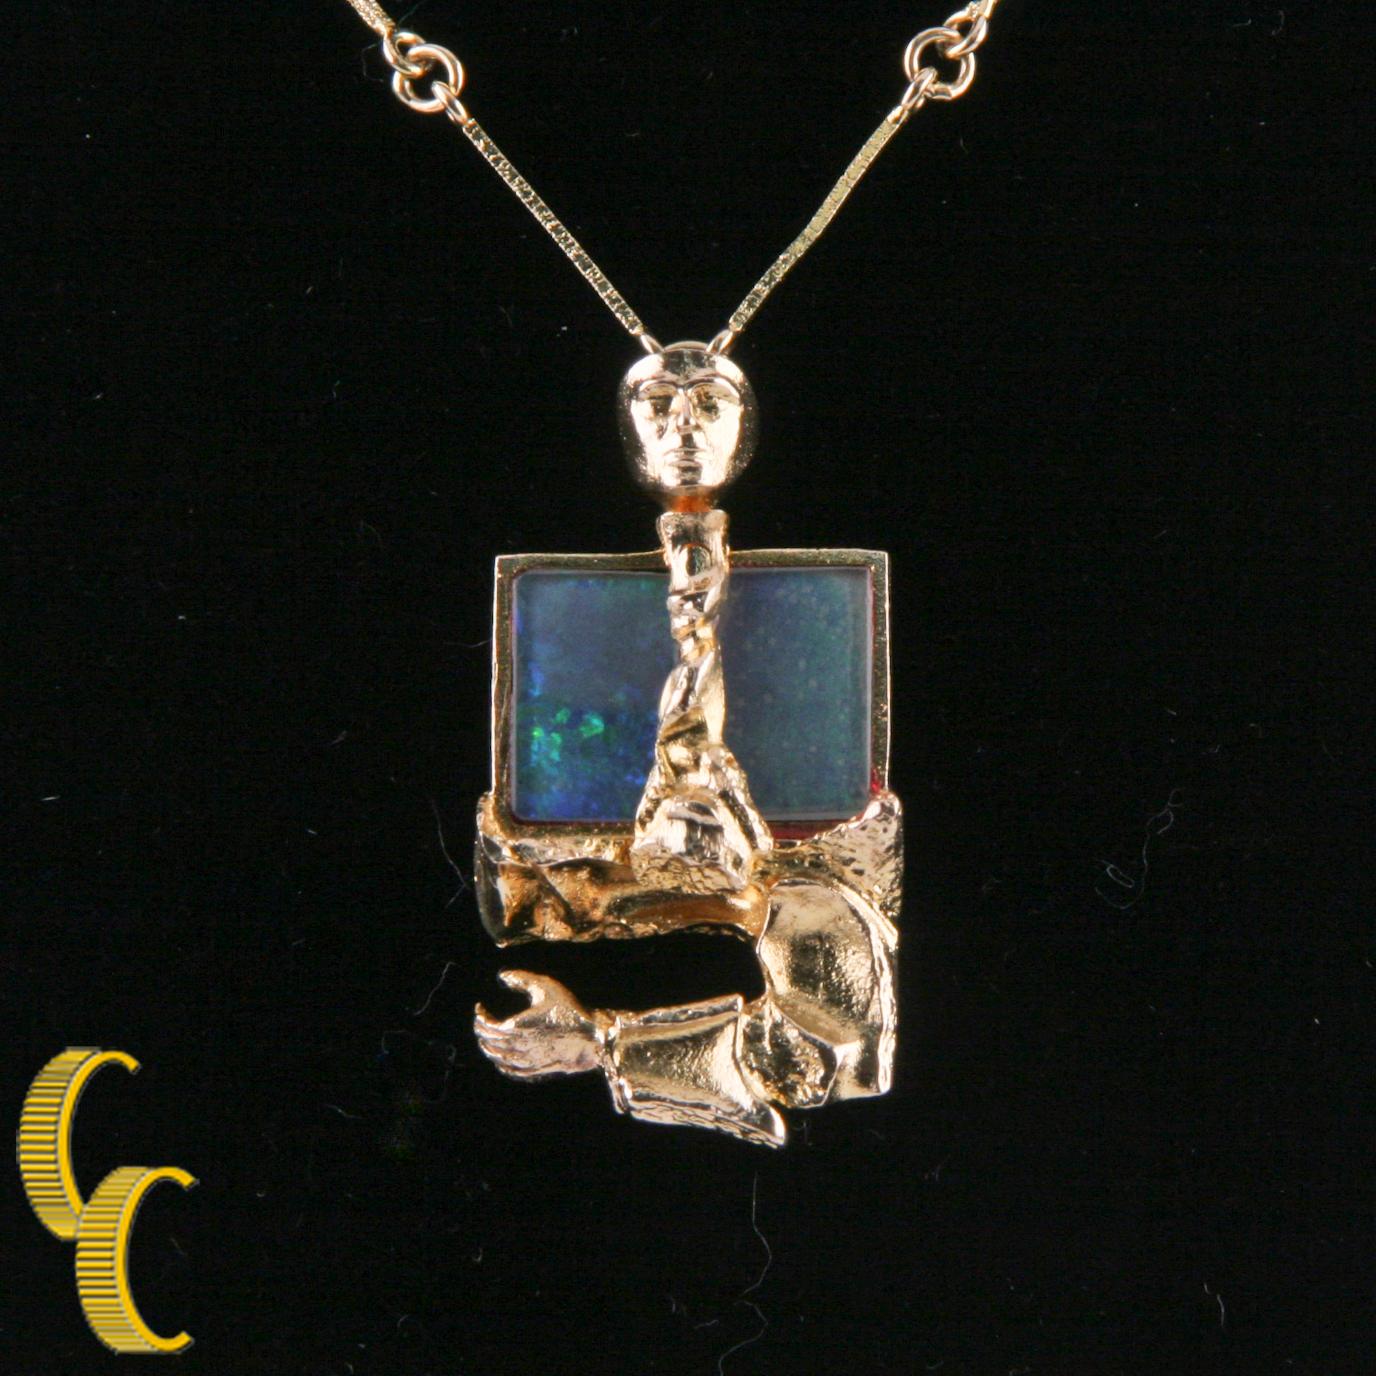 Gorgeous, Unique 14k Yellow Gold & Opal Necklace
Features 14k Yellow Gold Thin Bar Chain w/ Human Figurine 
Pendant Features Bezel-Set Black Opal Behind Figurine 
Pendant Wight = 15 mm
Pendant Height = 17.5 mm
Opal is 13 mm in Wide by 9 mm